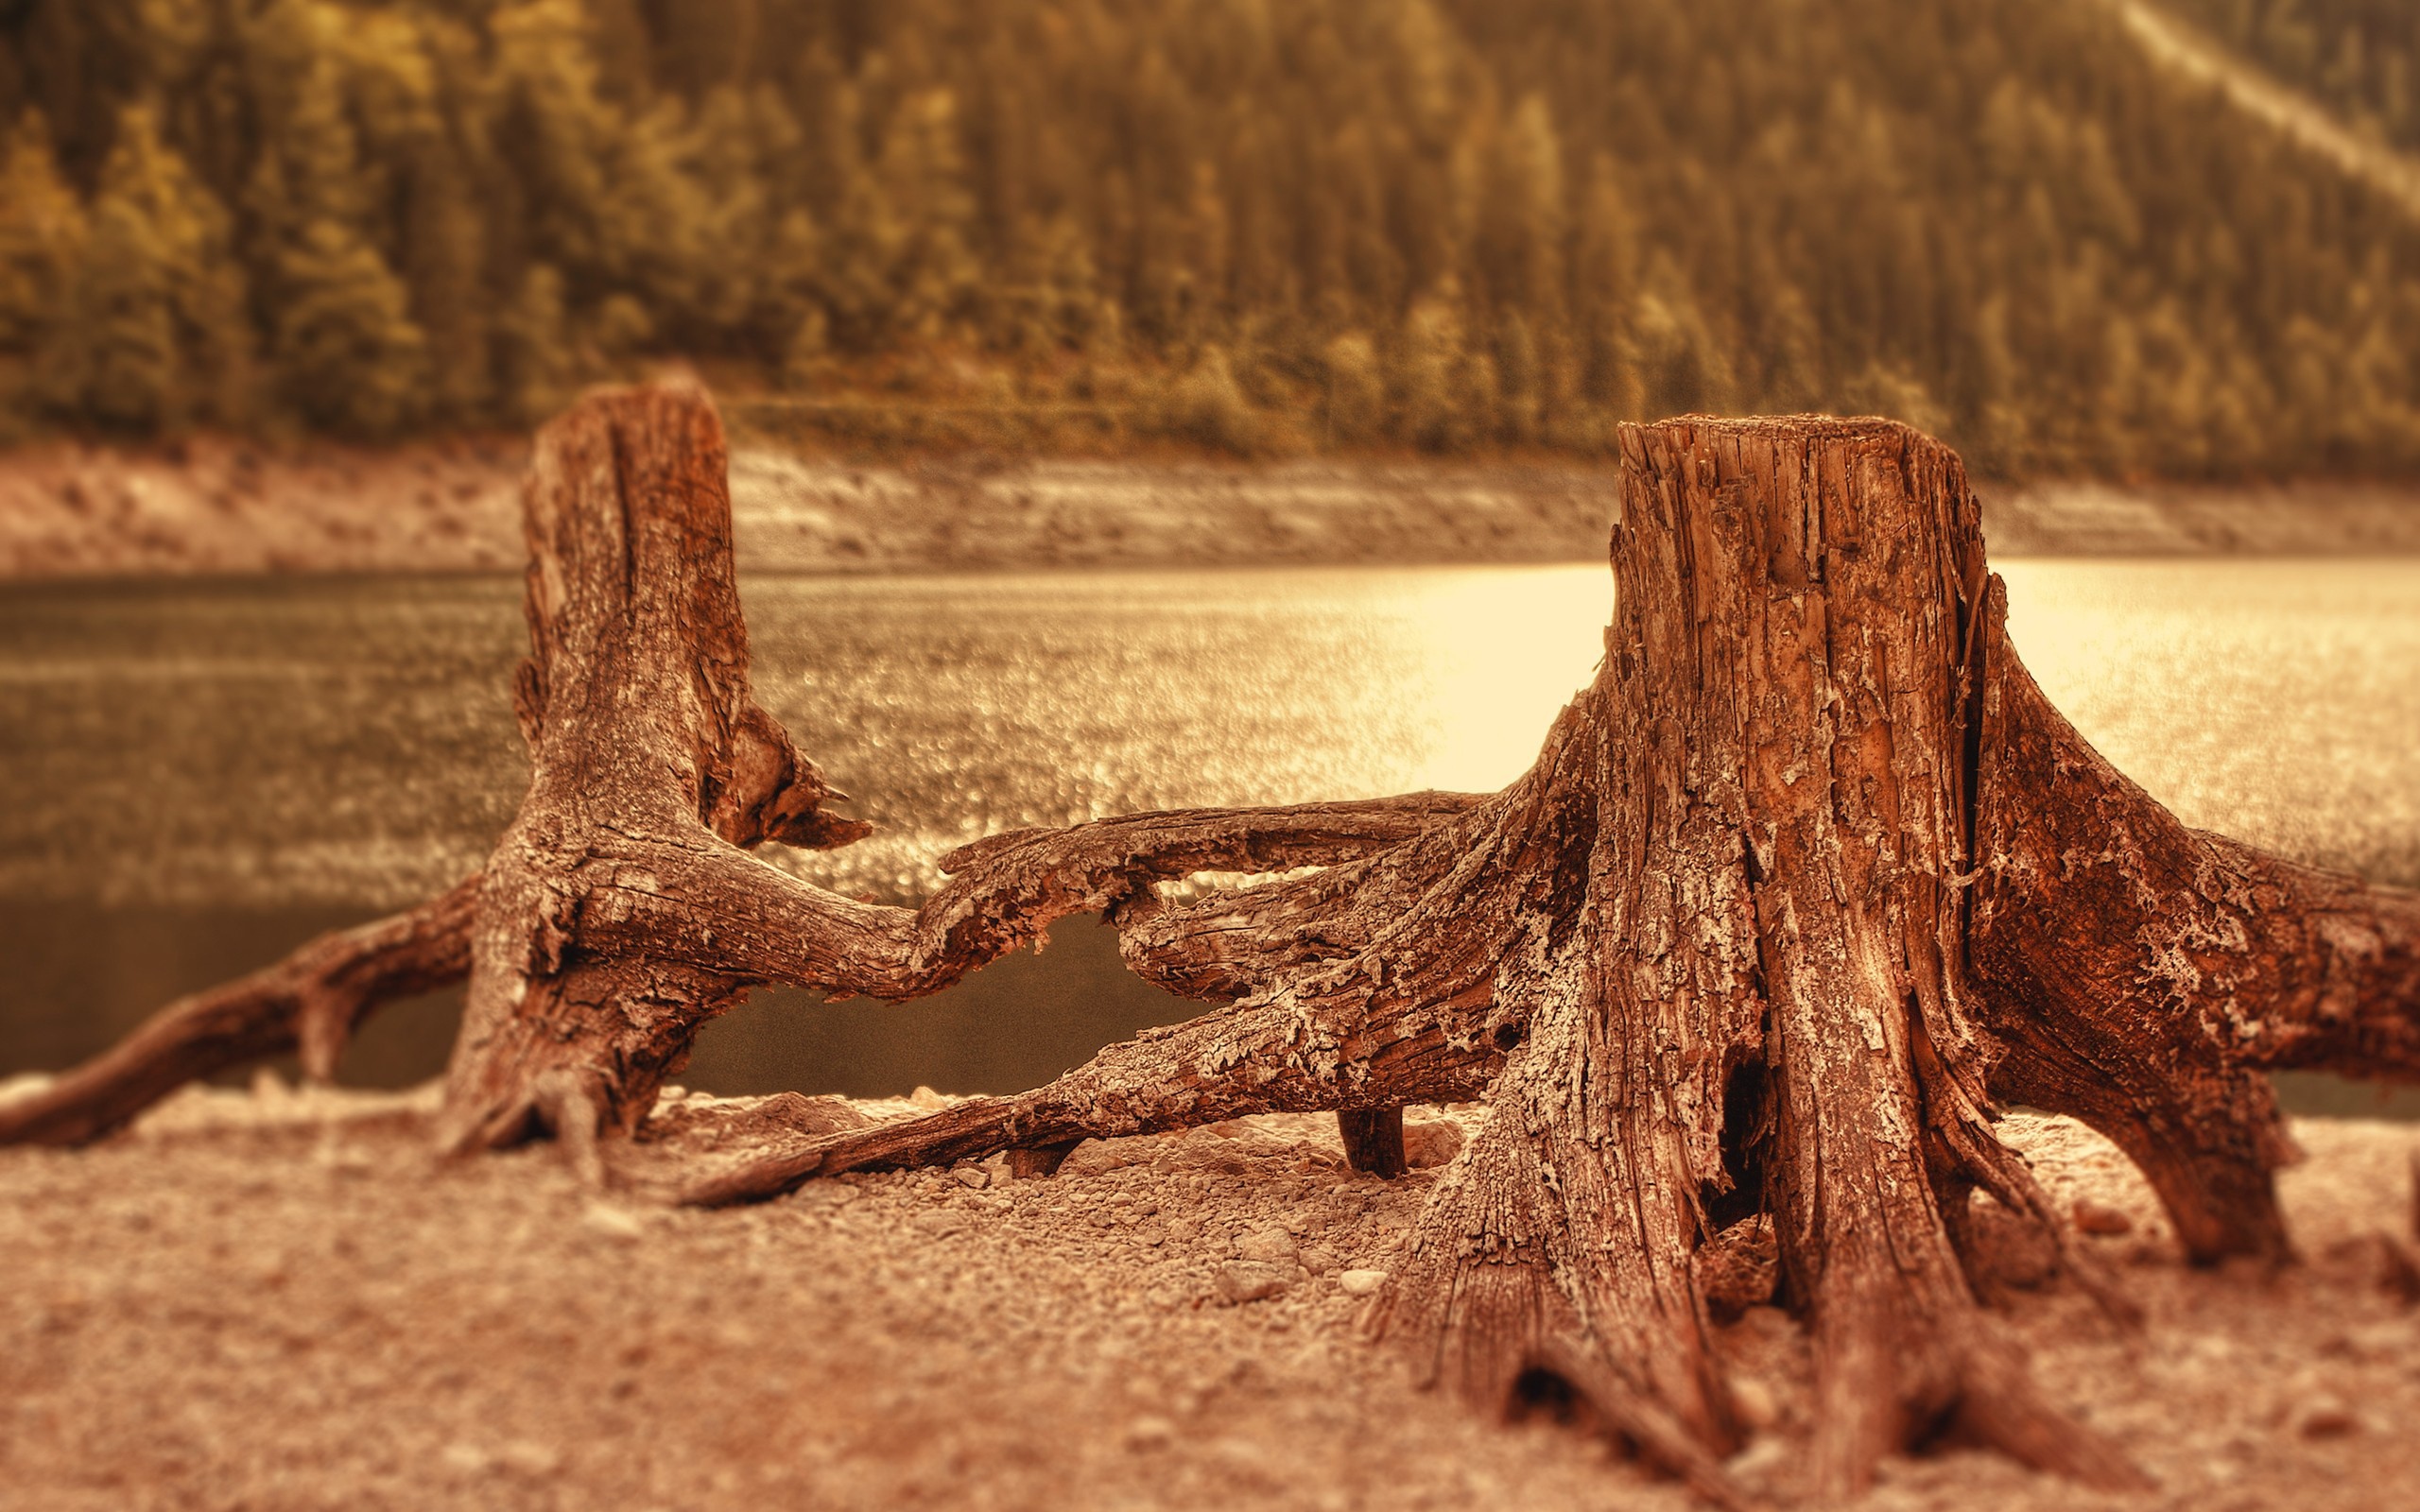 Two stump near the water